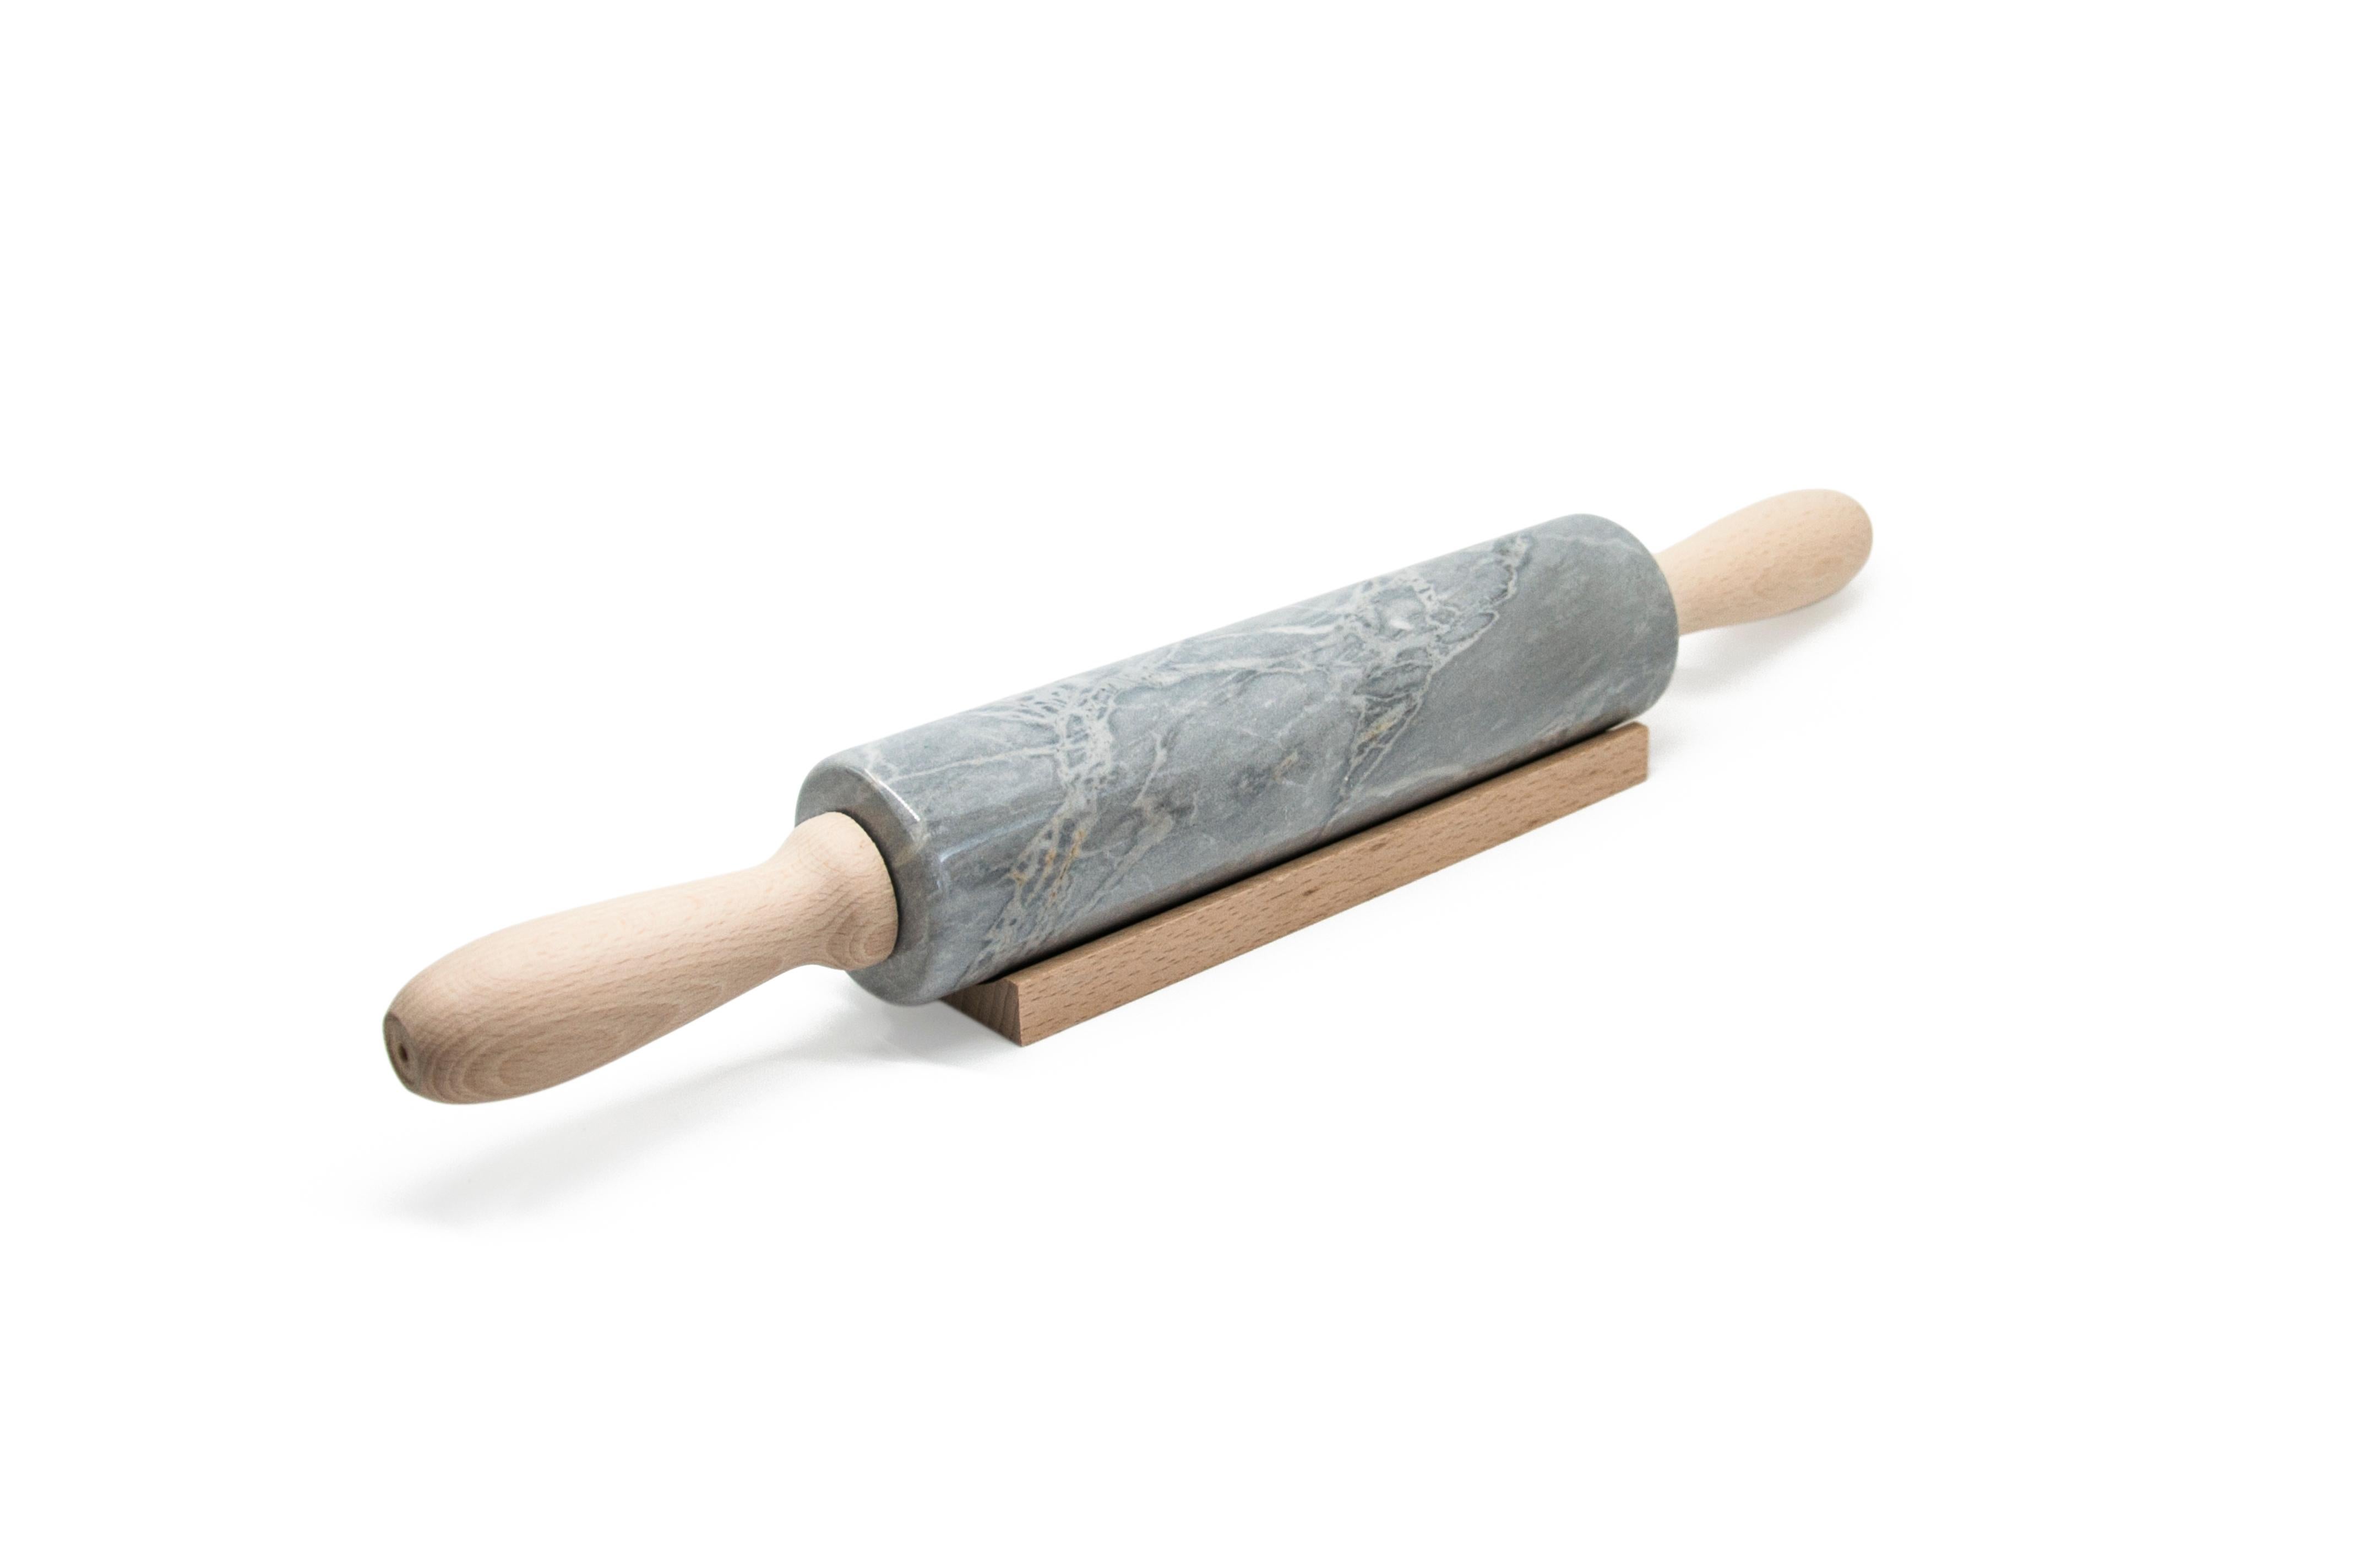 Grey Bardiglio marble rolling pin with wooden handles. It is assembled manually. Each piece is in a way unique (every marble block is different in veins and shades) and handmade by Italian artisans specialized over generations in processing marble.